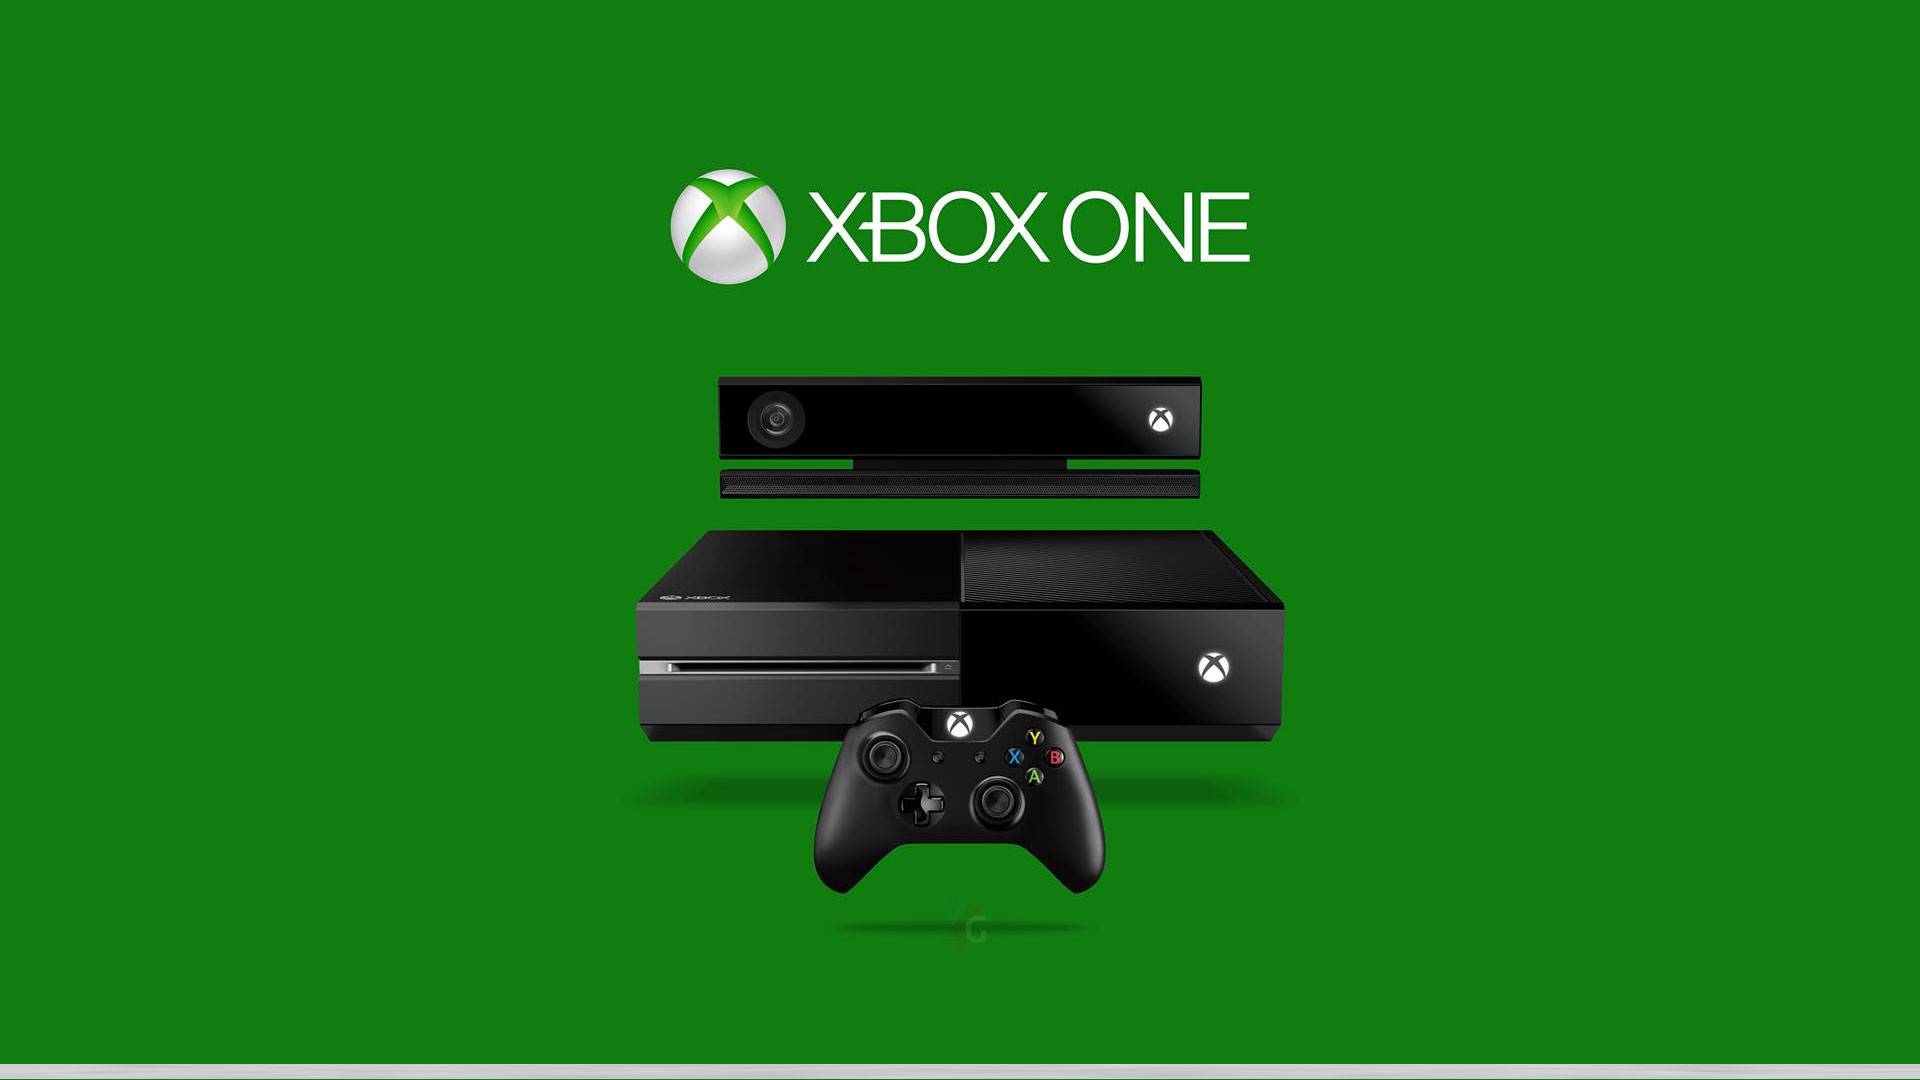 Xbox One Wallpaper In HD Live